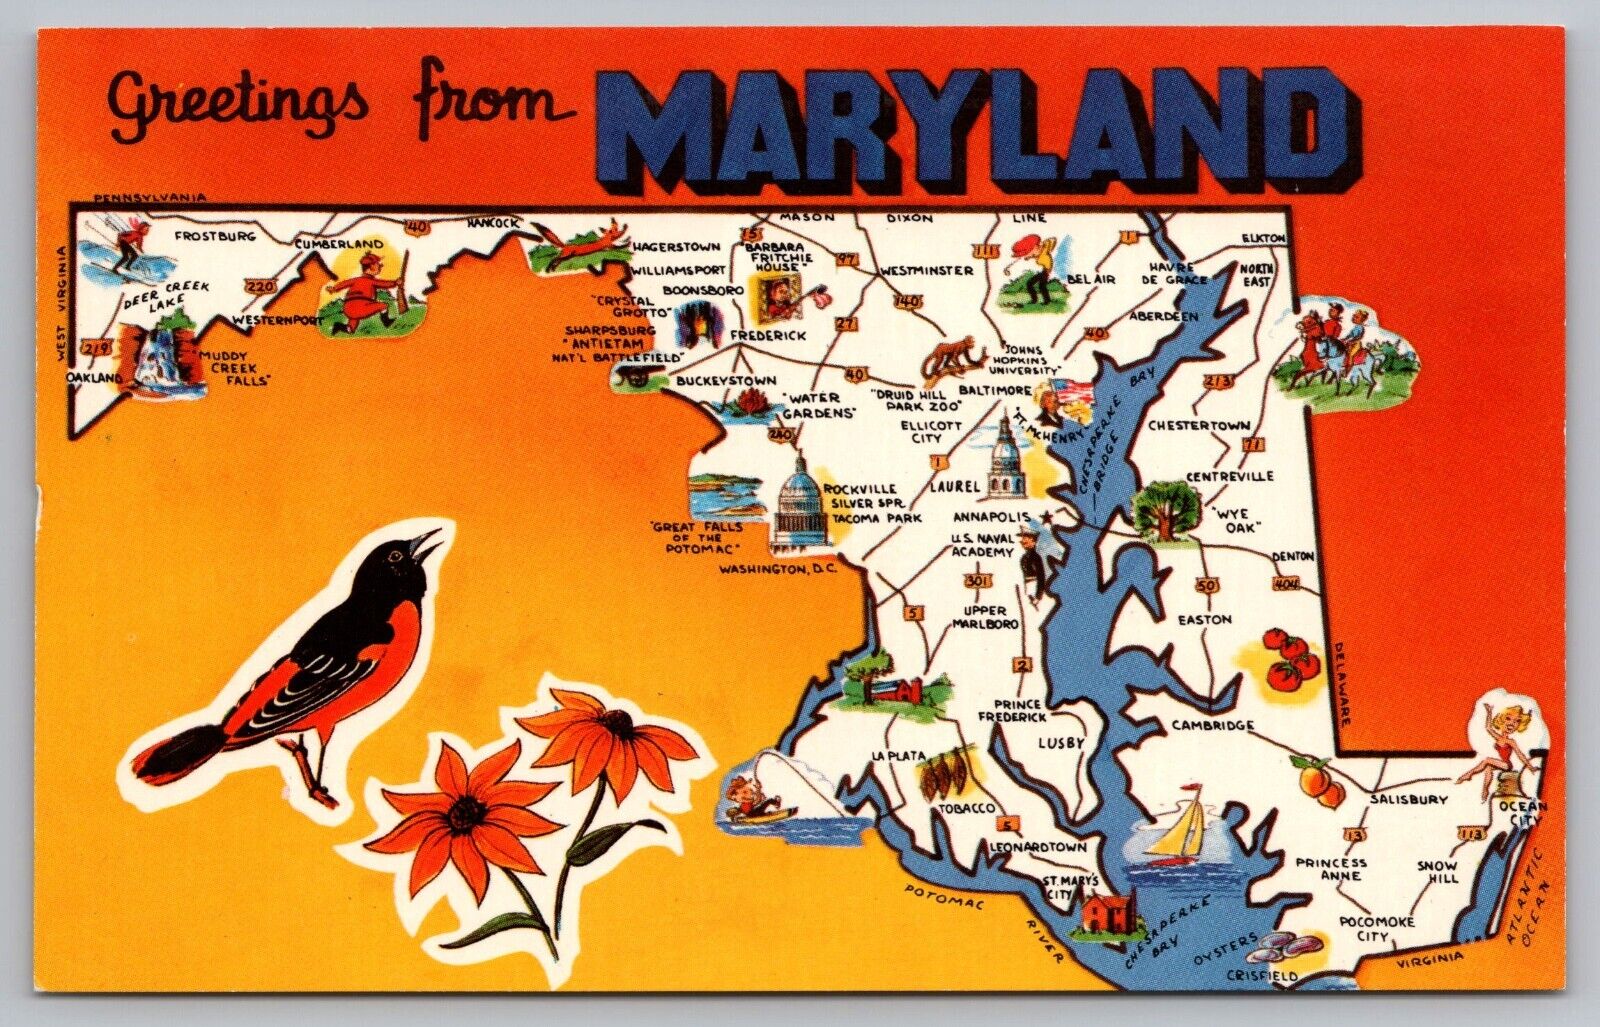 Postcard Greetings from Maryland Old Line State Landmarks Map